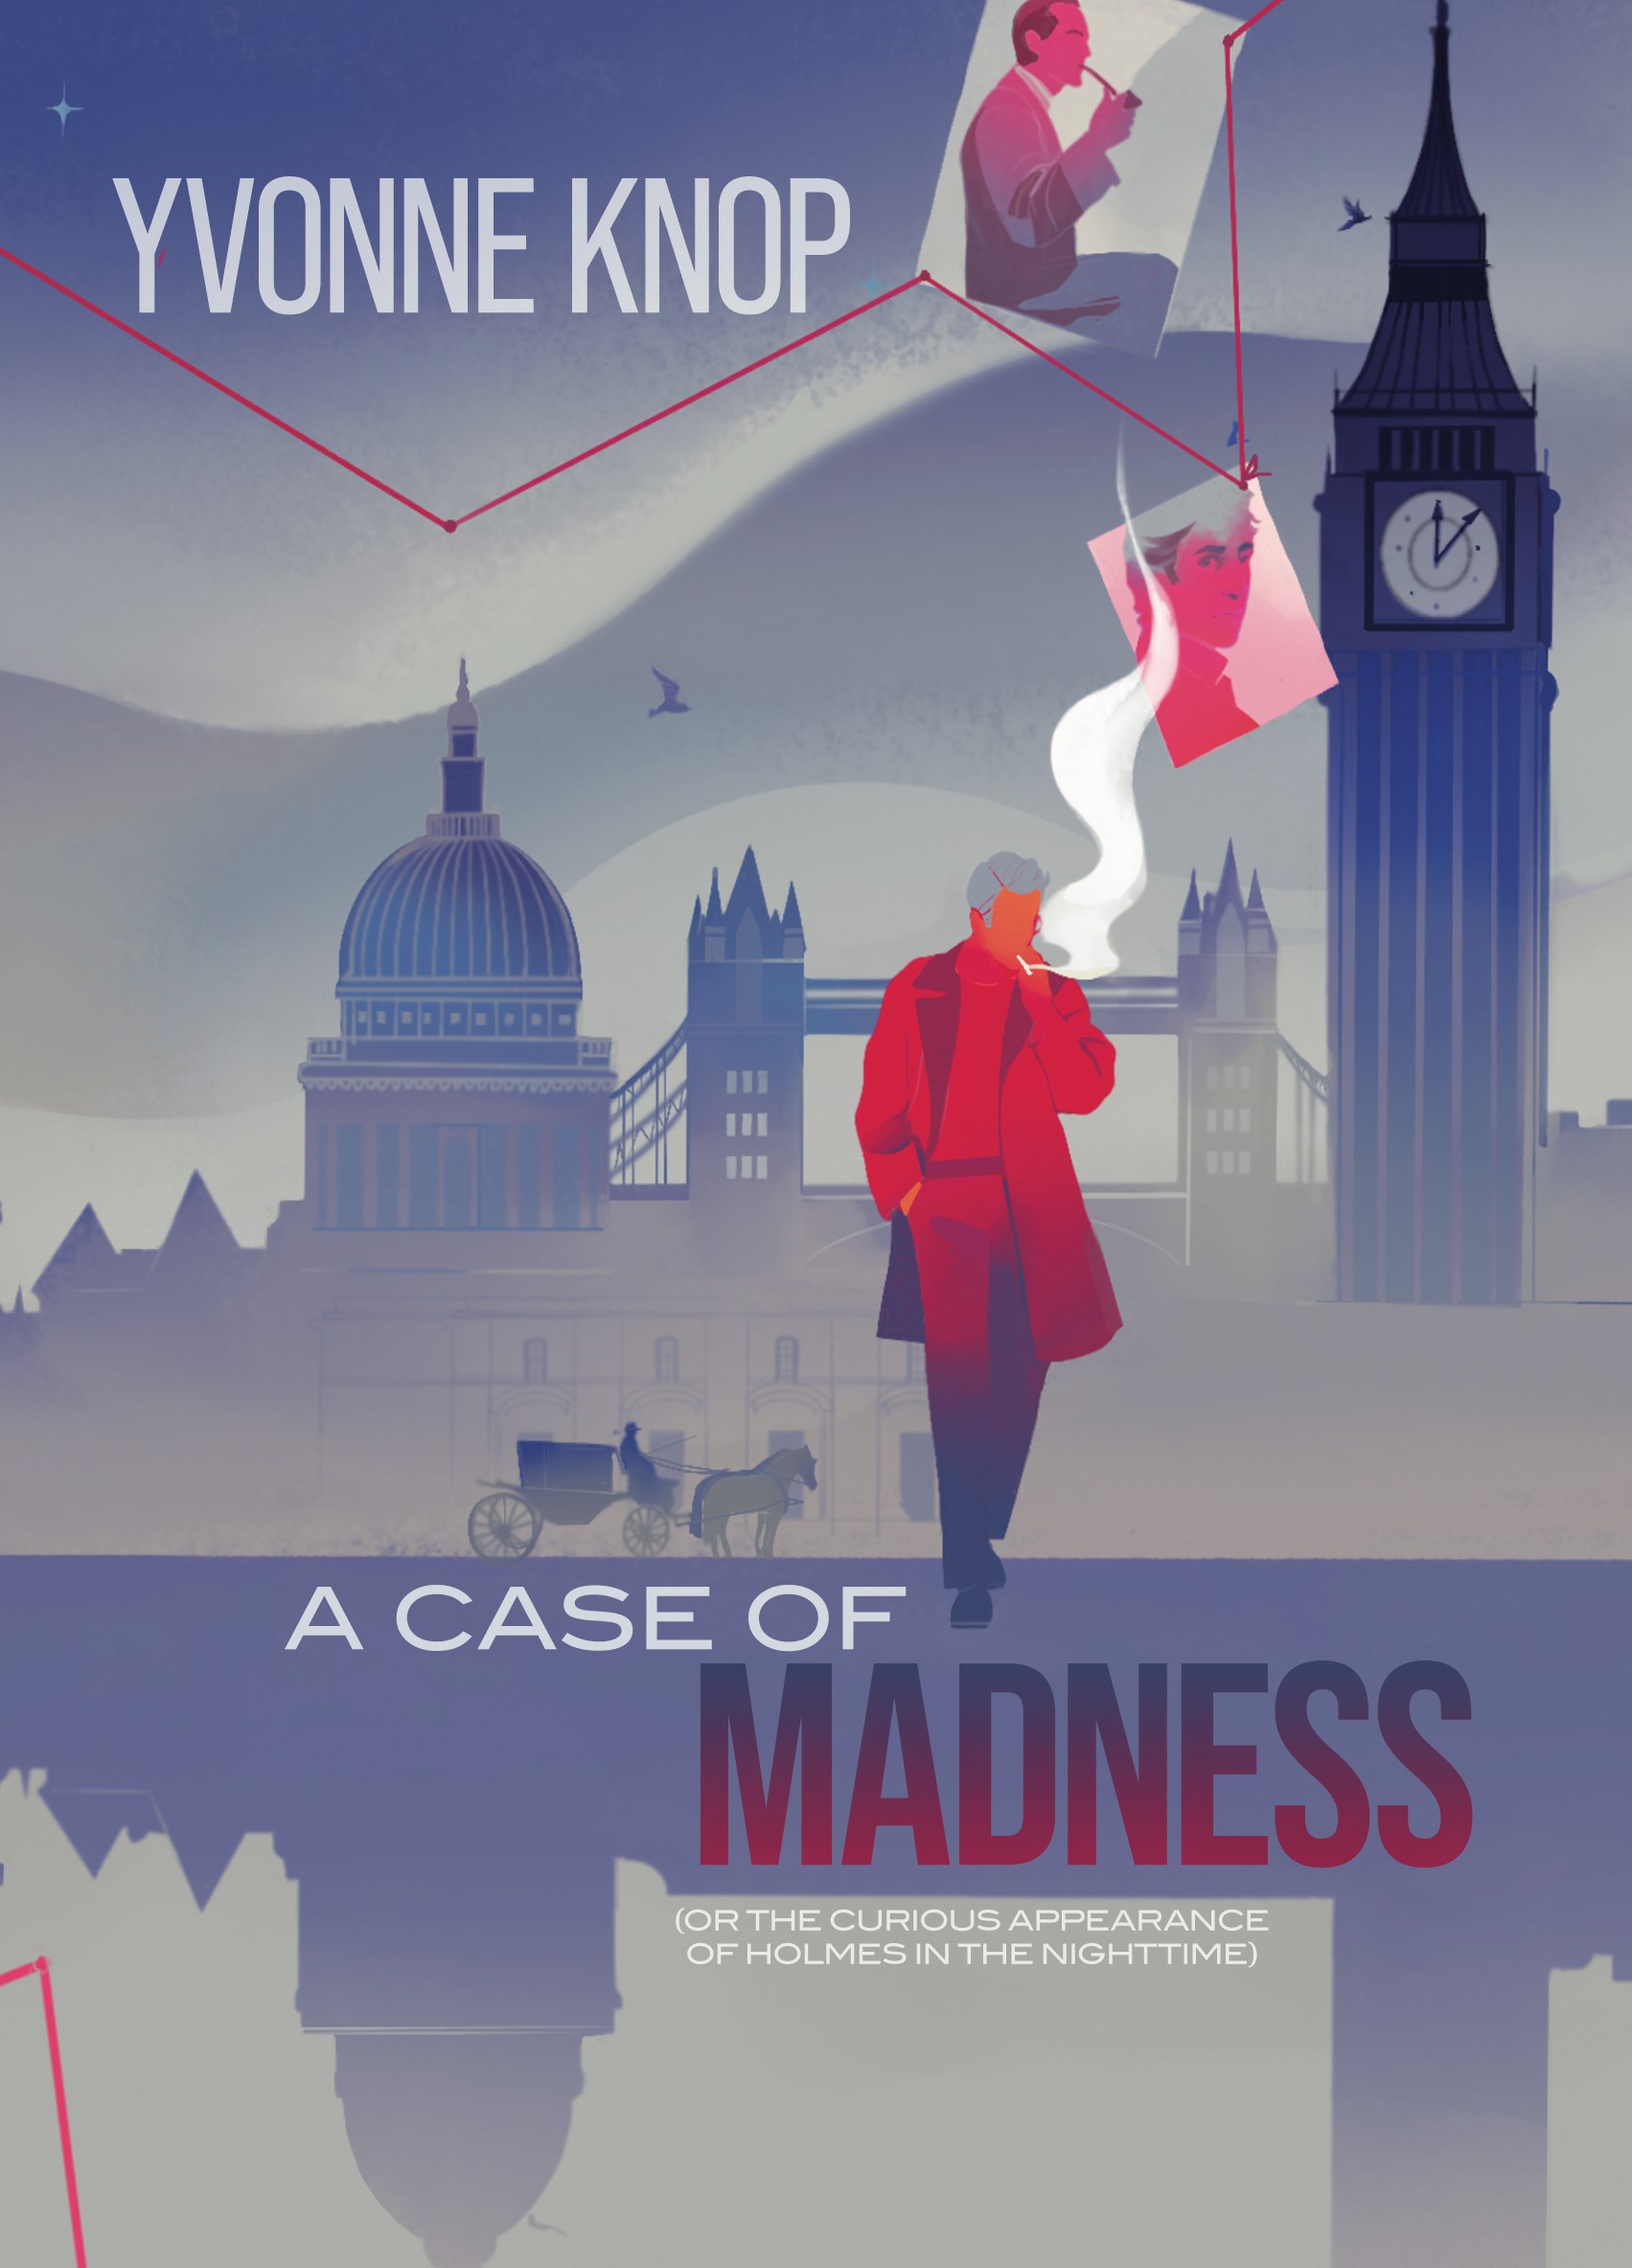 A Case of Madness by Yvonne Knop